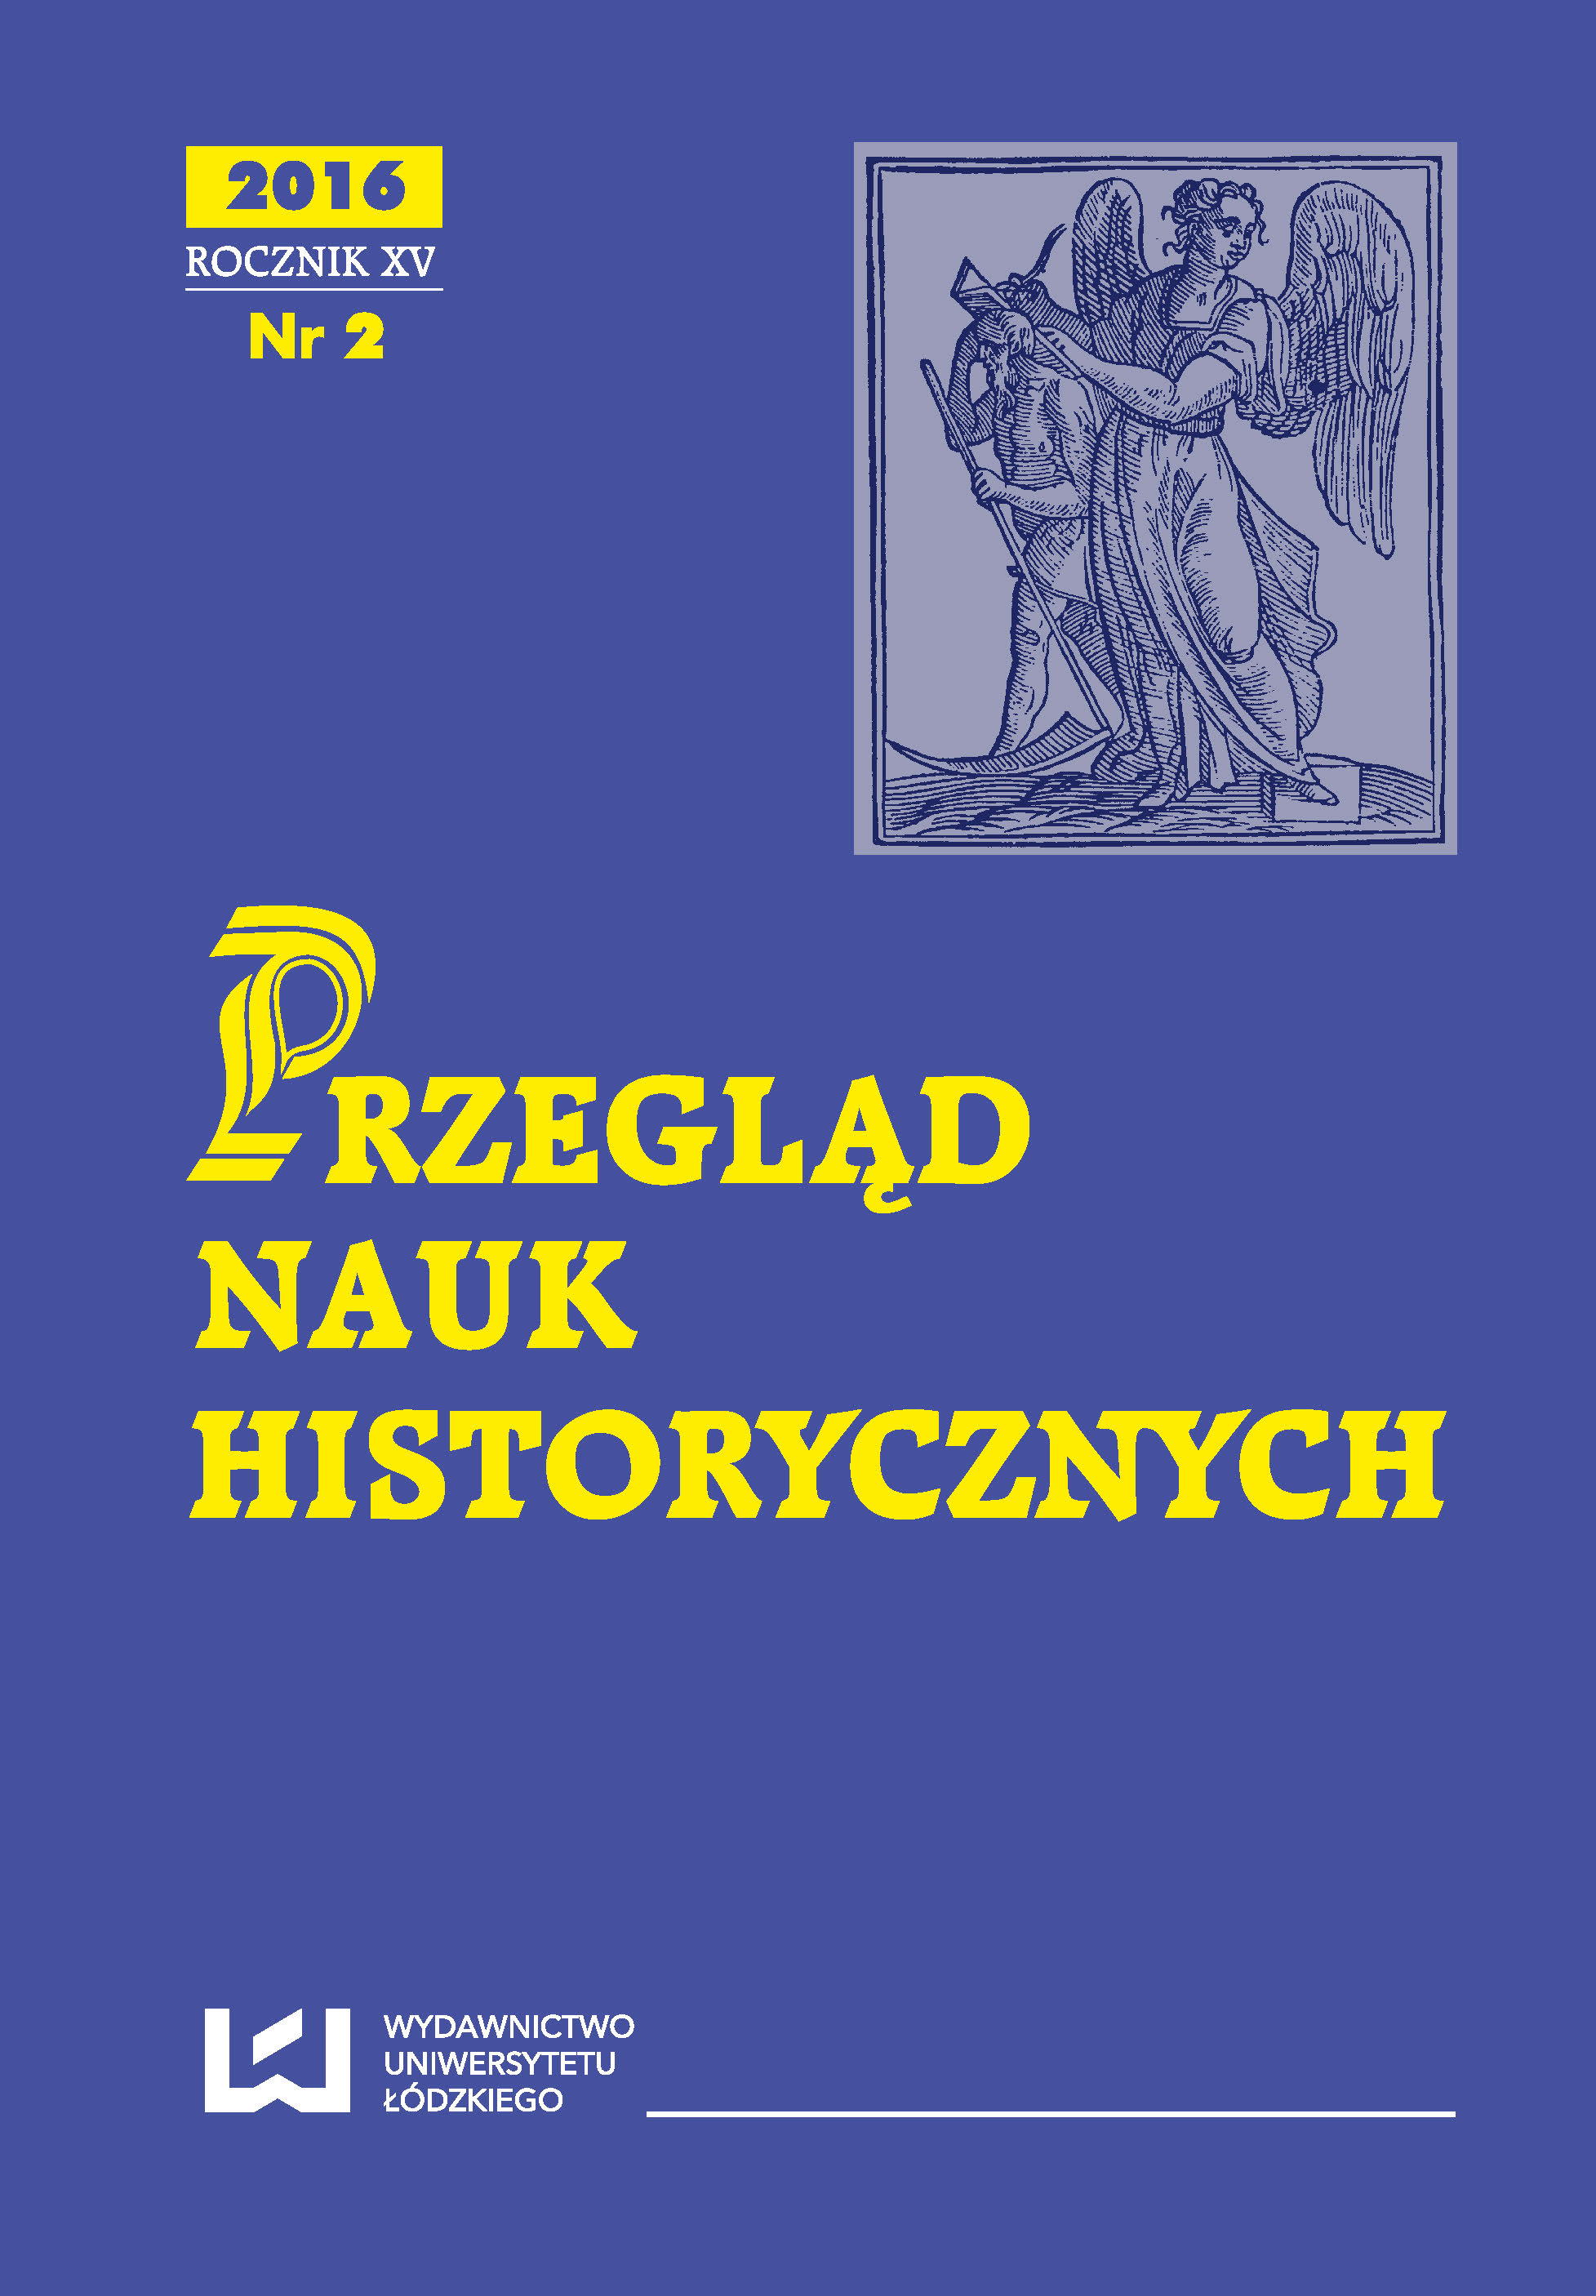 A description of a decan’s visit to the parish church in Małogoszcz in the year 1830 Cover Image